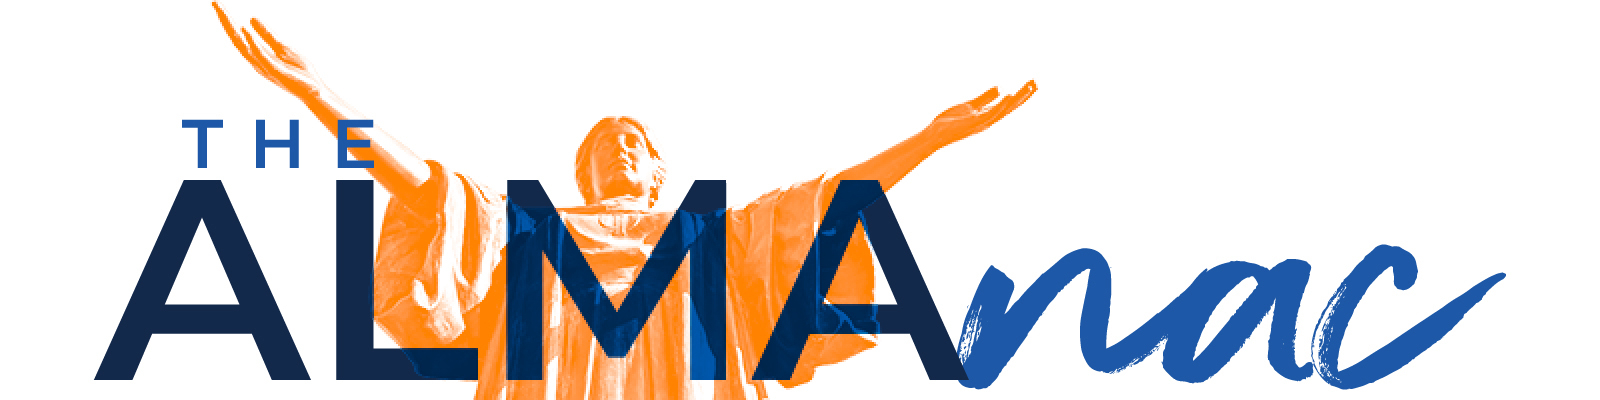 The ALMAnac header image featuring stylized text and Alma Mater statue with arms uplifted